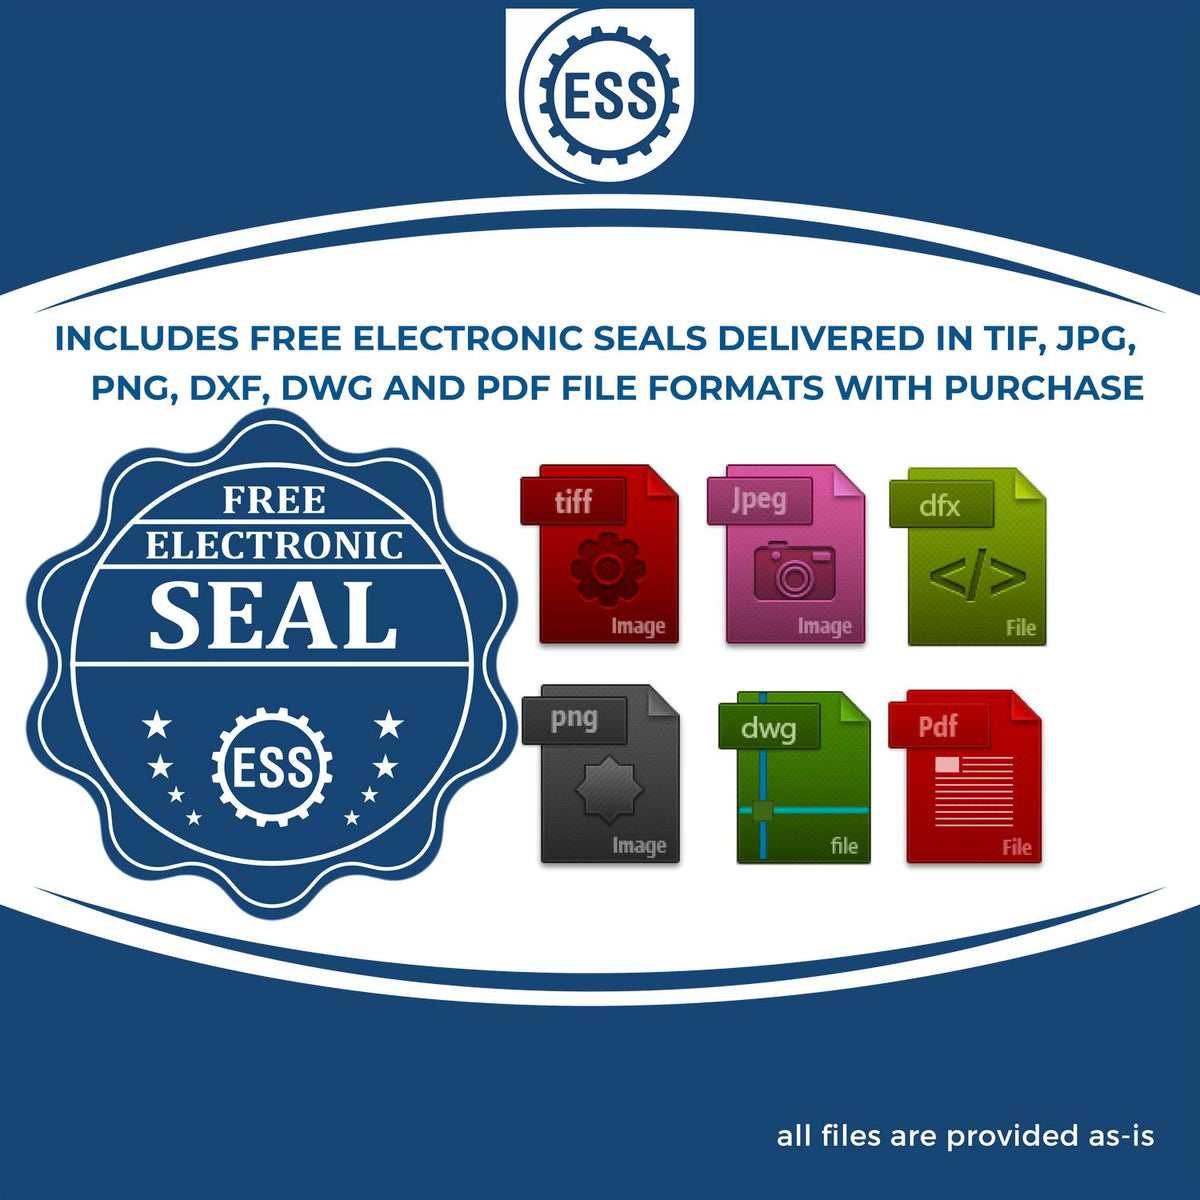 An infographic for the free electronic seal for the Premium MaxLight Pre-Inked Texas Engineering Stamp illustrating the different file type icons such as DXF, DWG, TIF, JPG and PNG.